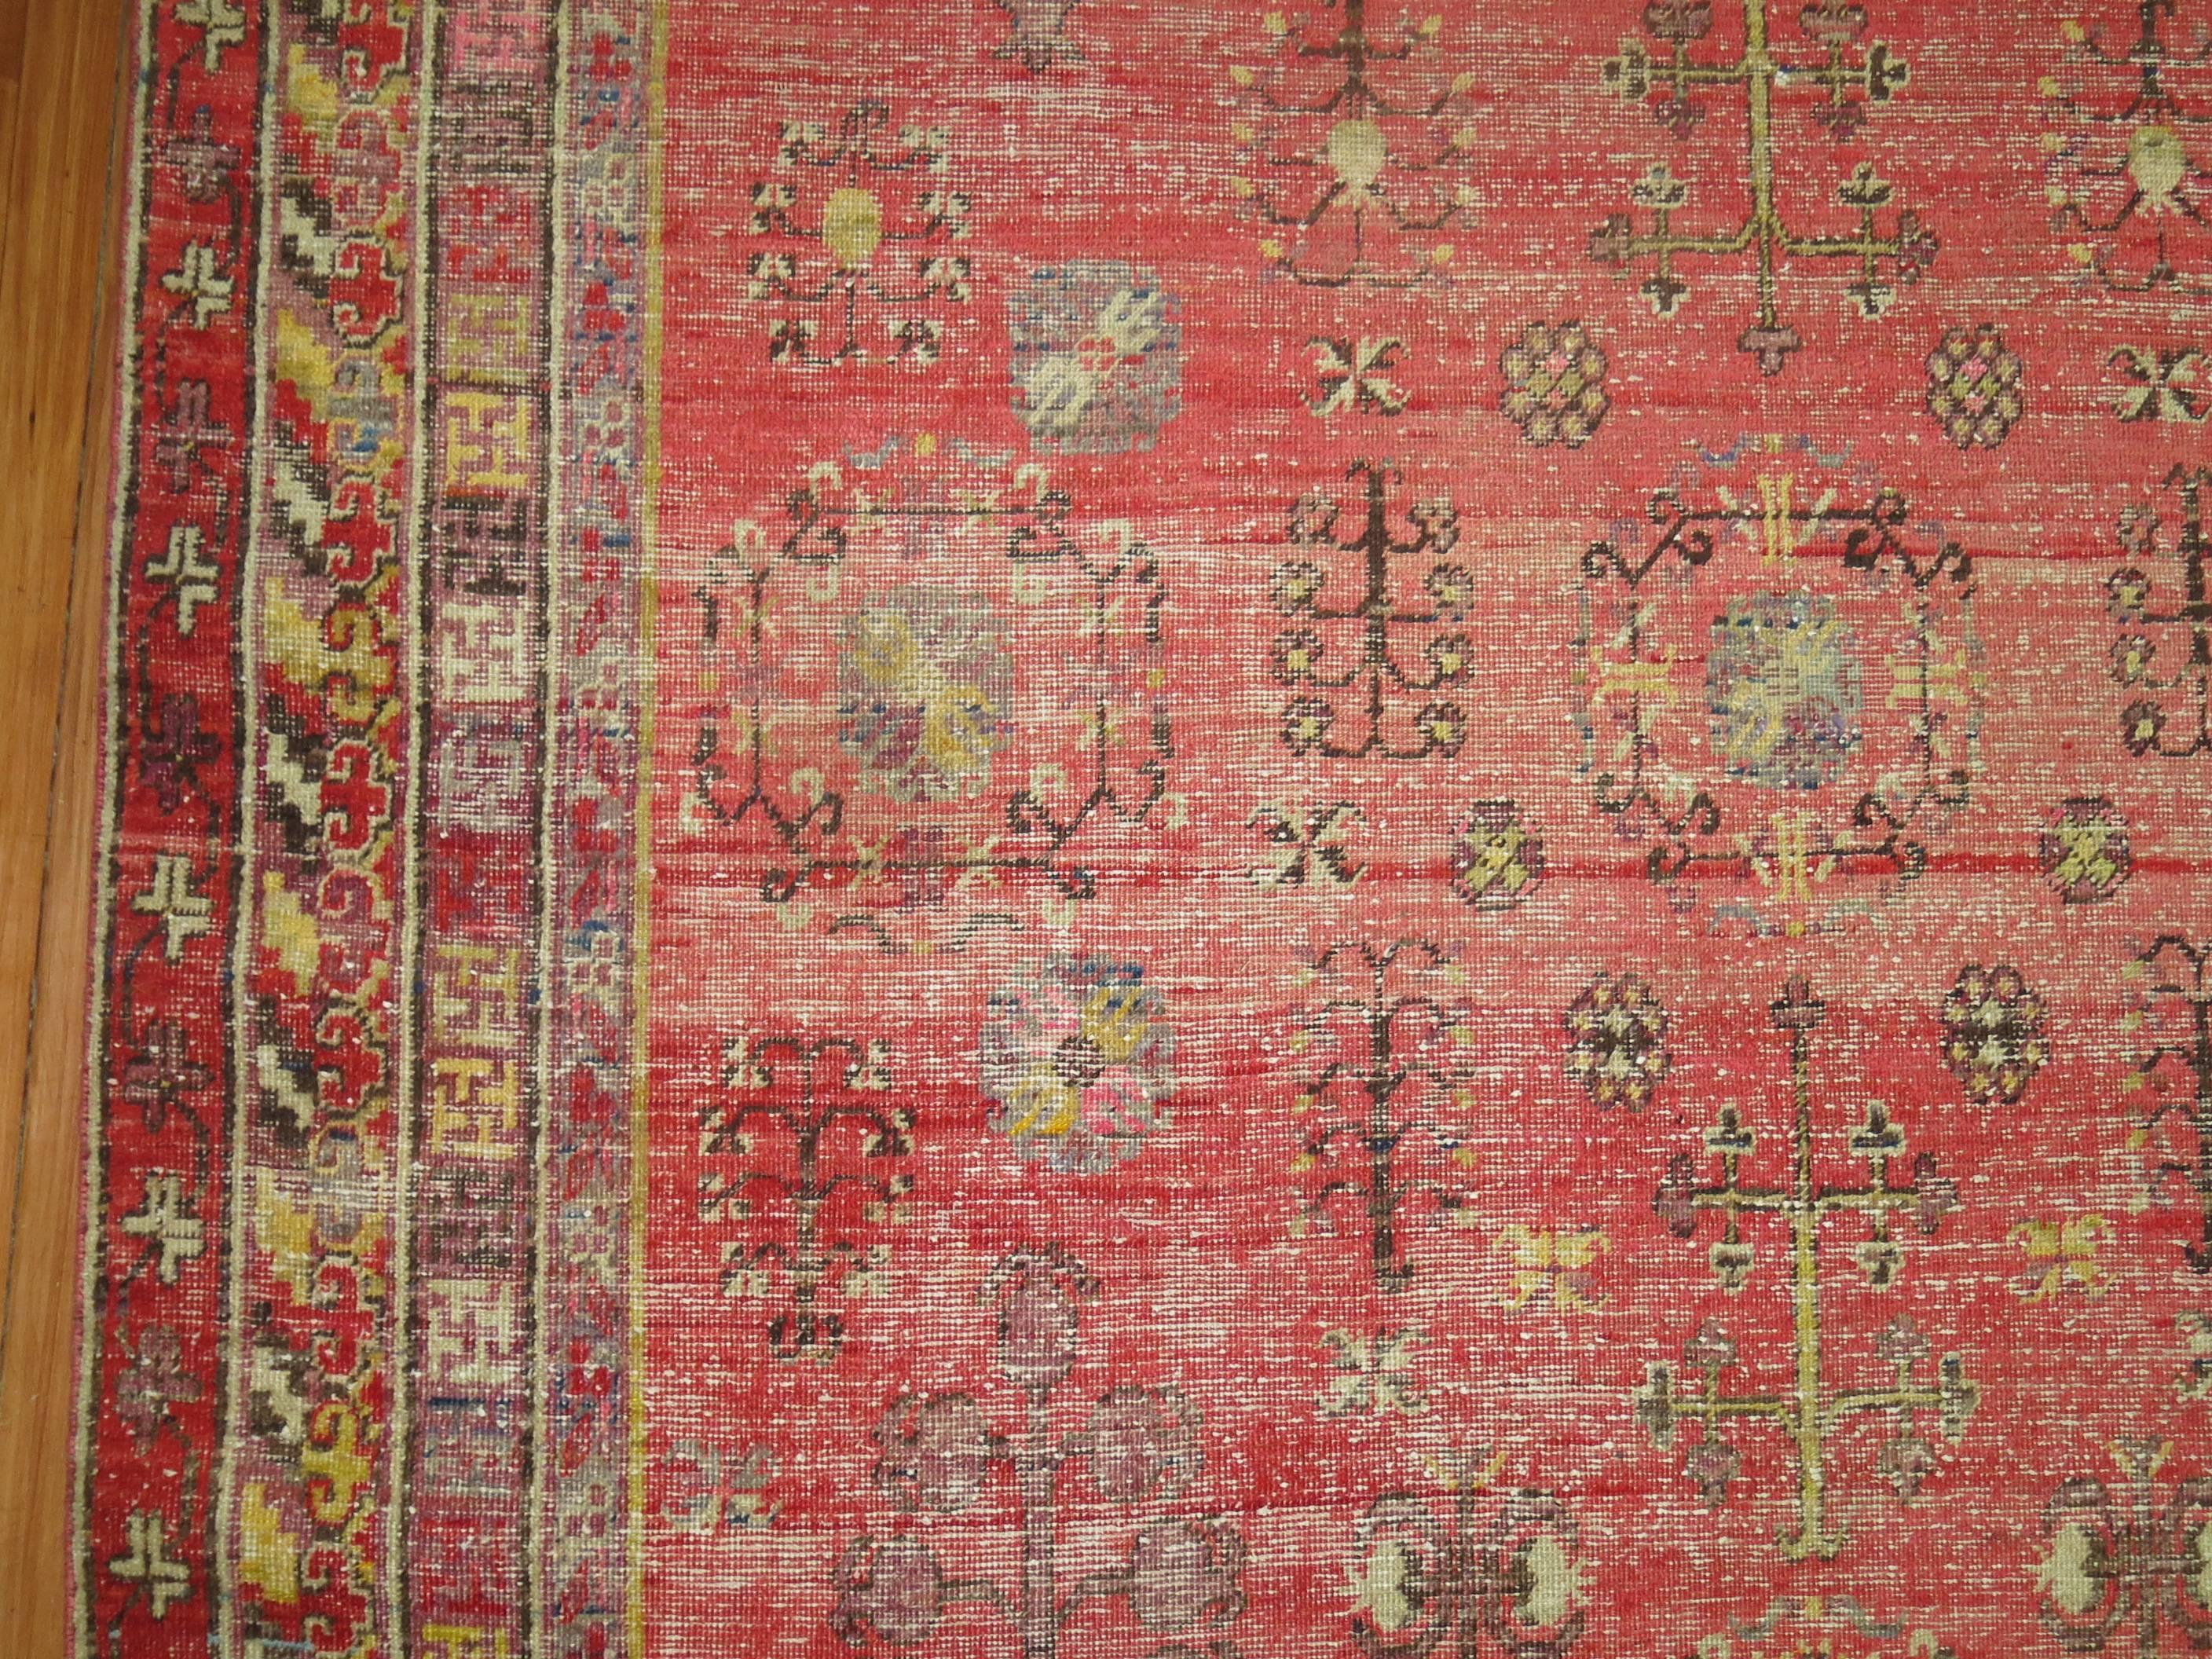 A shabby chic antique khotan rug in predominant pinkish/red